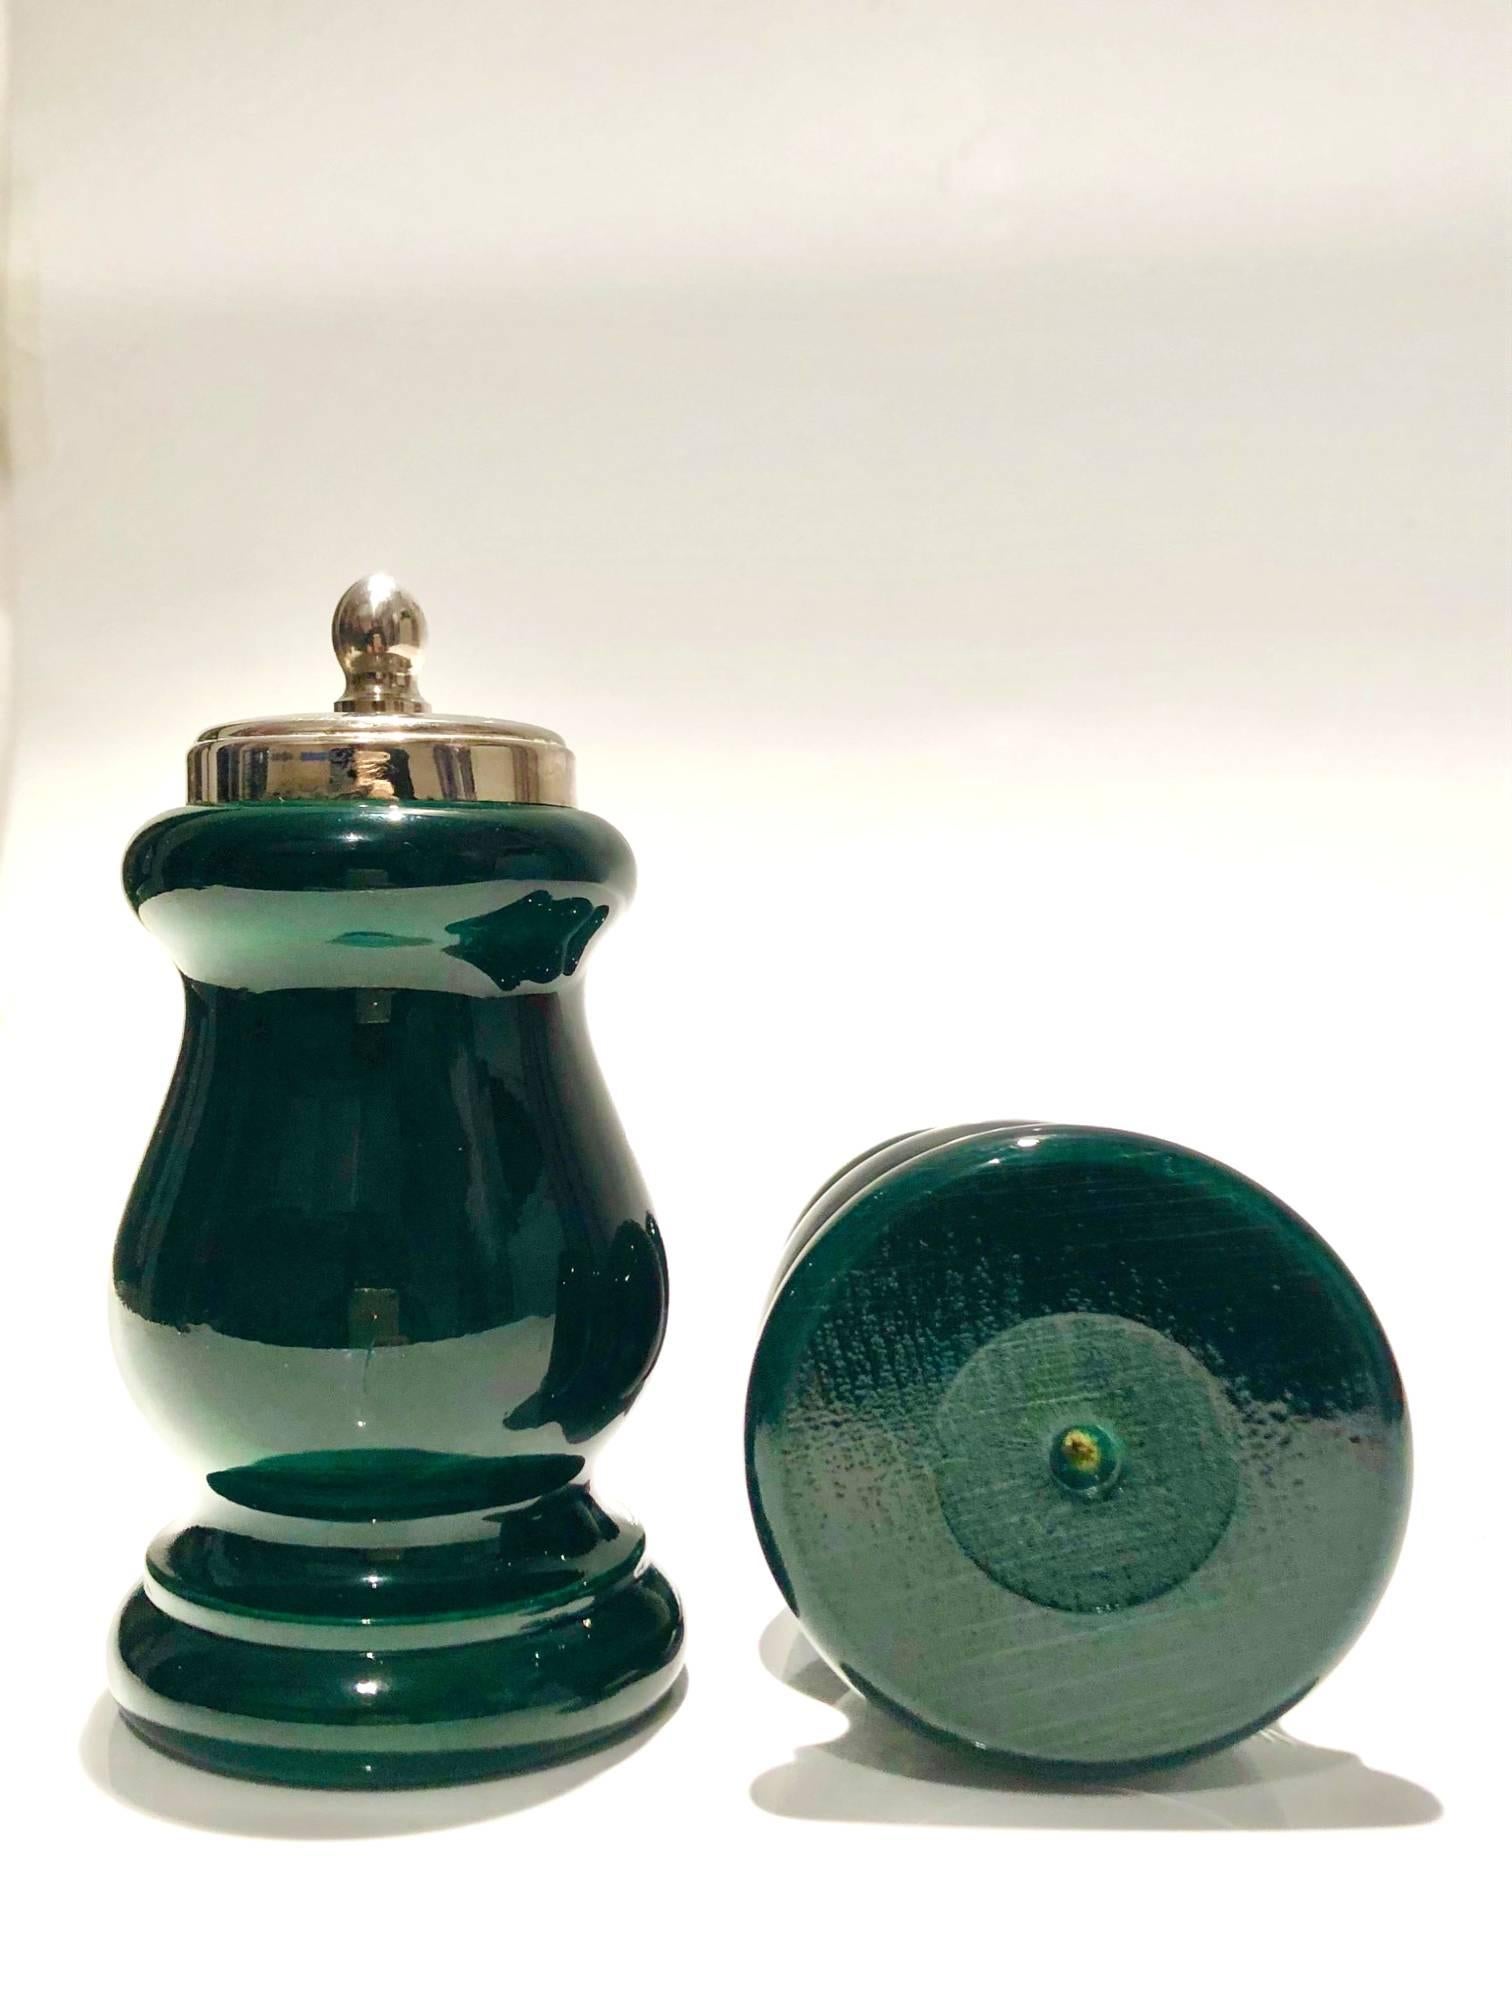 Gucci Home decor, Silver tone and Green lacquered finish wood salt shakers, green malachite colour, Gucci logo engraved on both lids, light weighted. 

Condition: very good, vintage piece from the 1980's, all in order 
Measurements: 